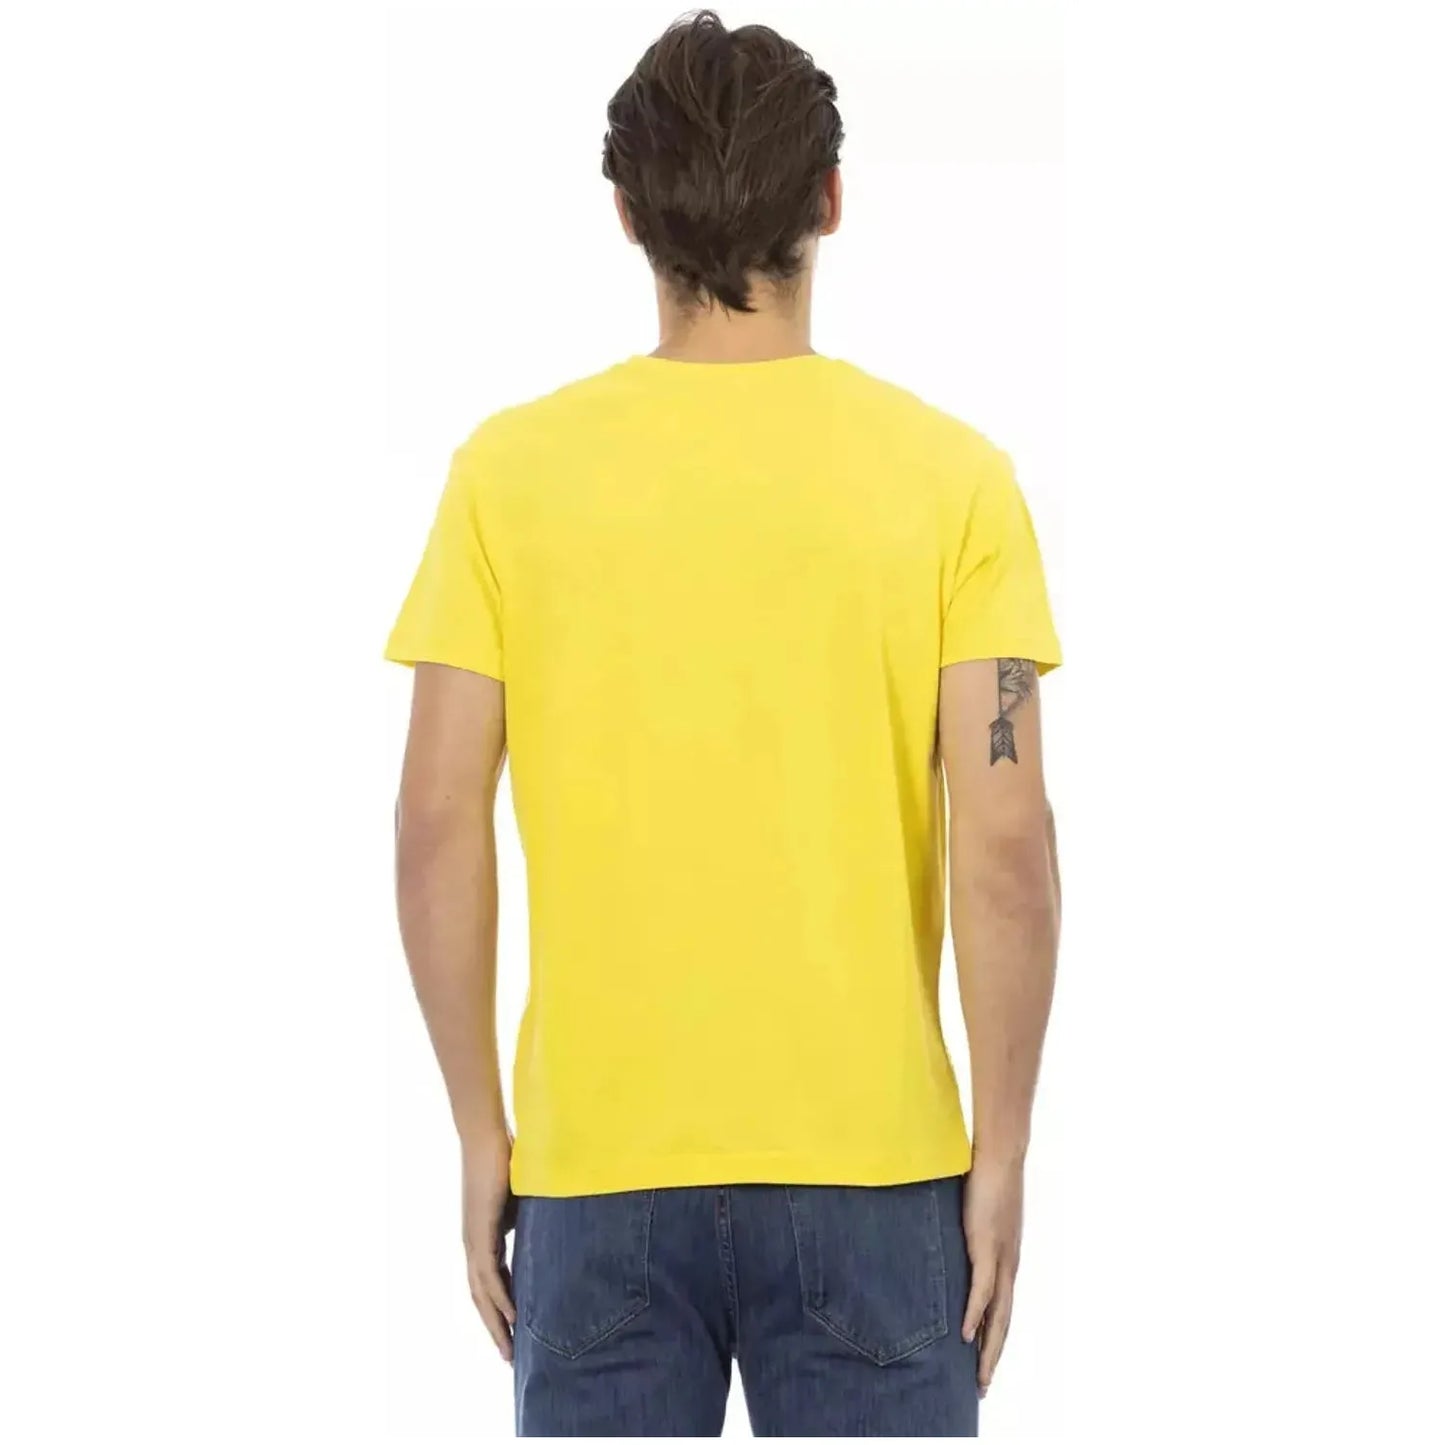 Trussardi Action Vibrant Yellow V-Neck Tee with Chest Print yellow-cotton-t-shirt-6